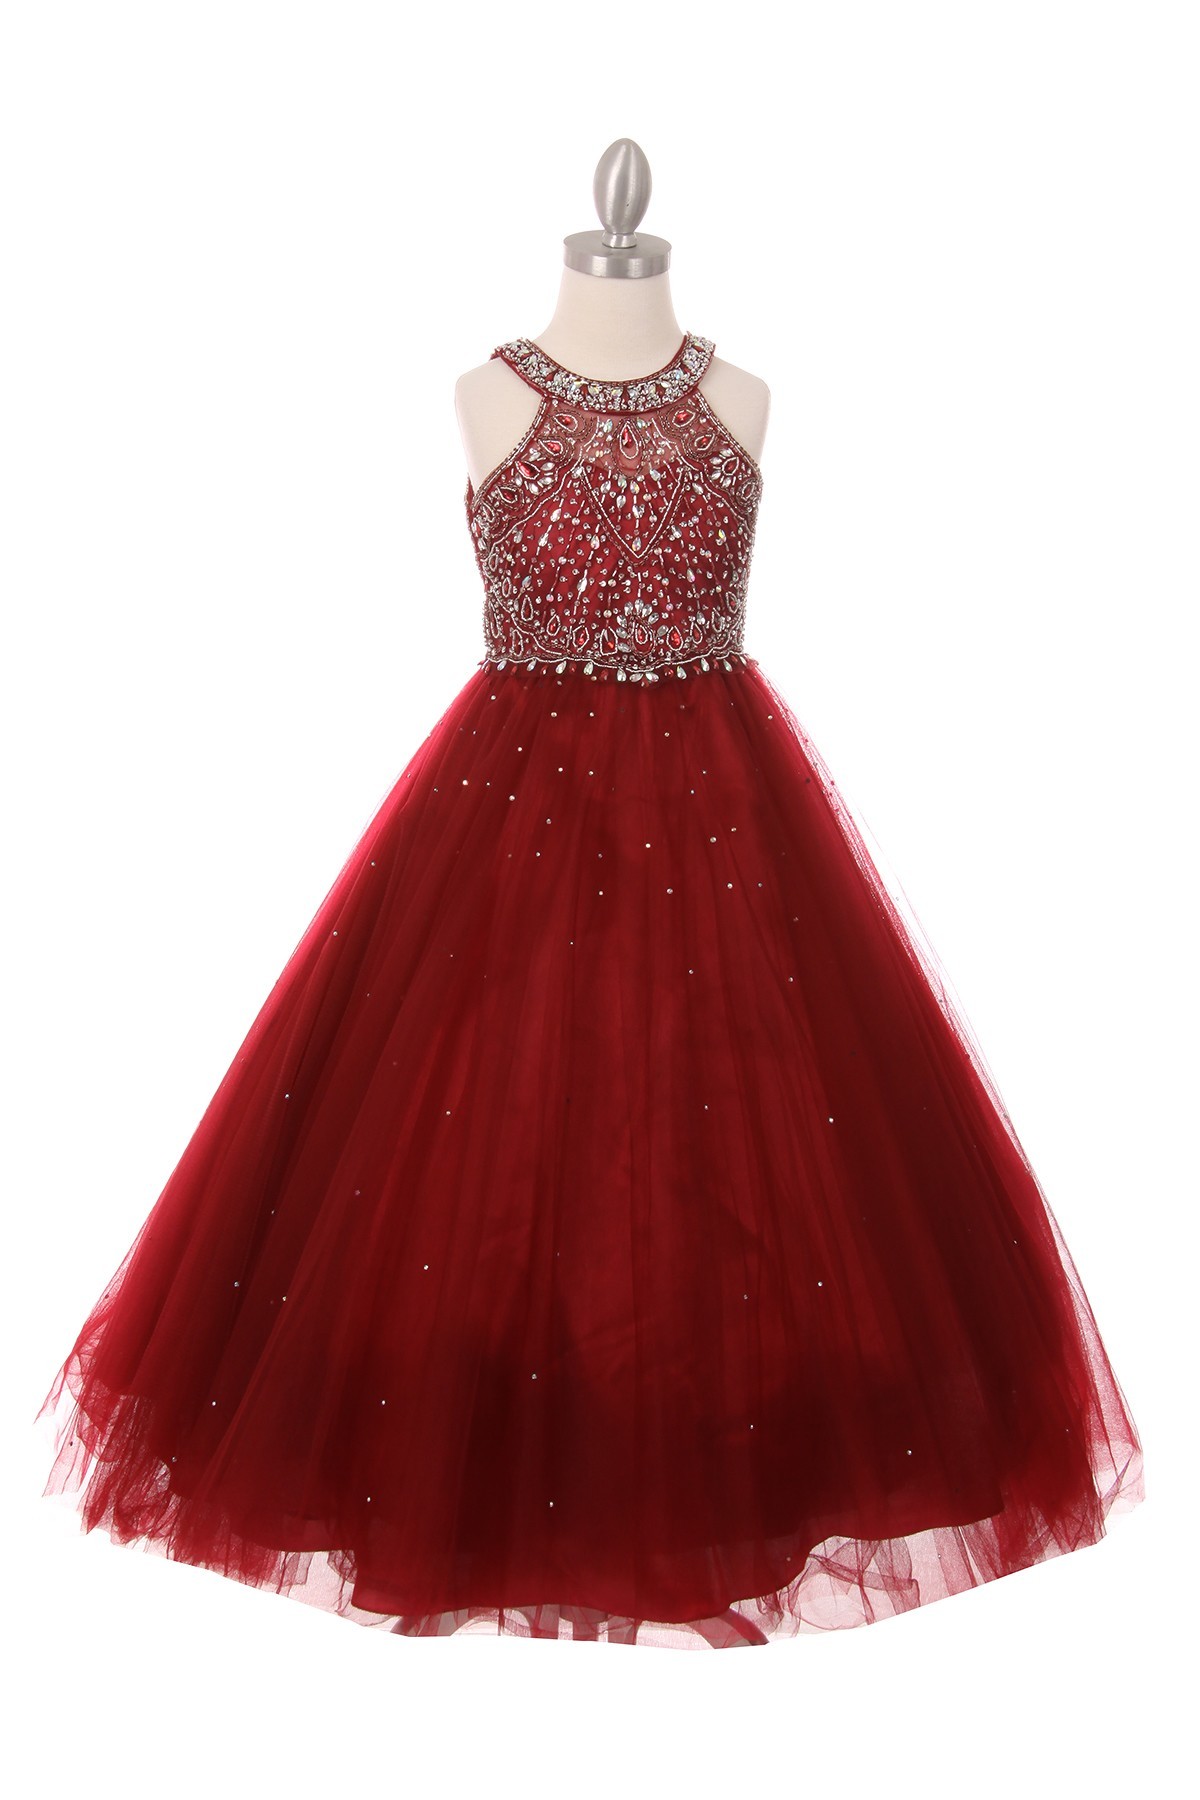 Burgundy  rhinestone halter neck party dress. Super soft tulle skirt with wire netting on the bottom.  